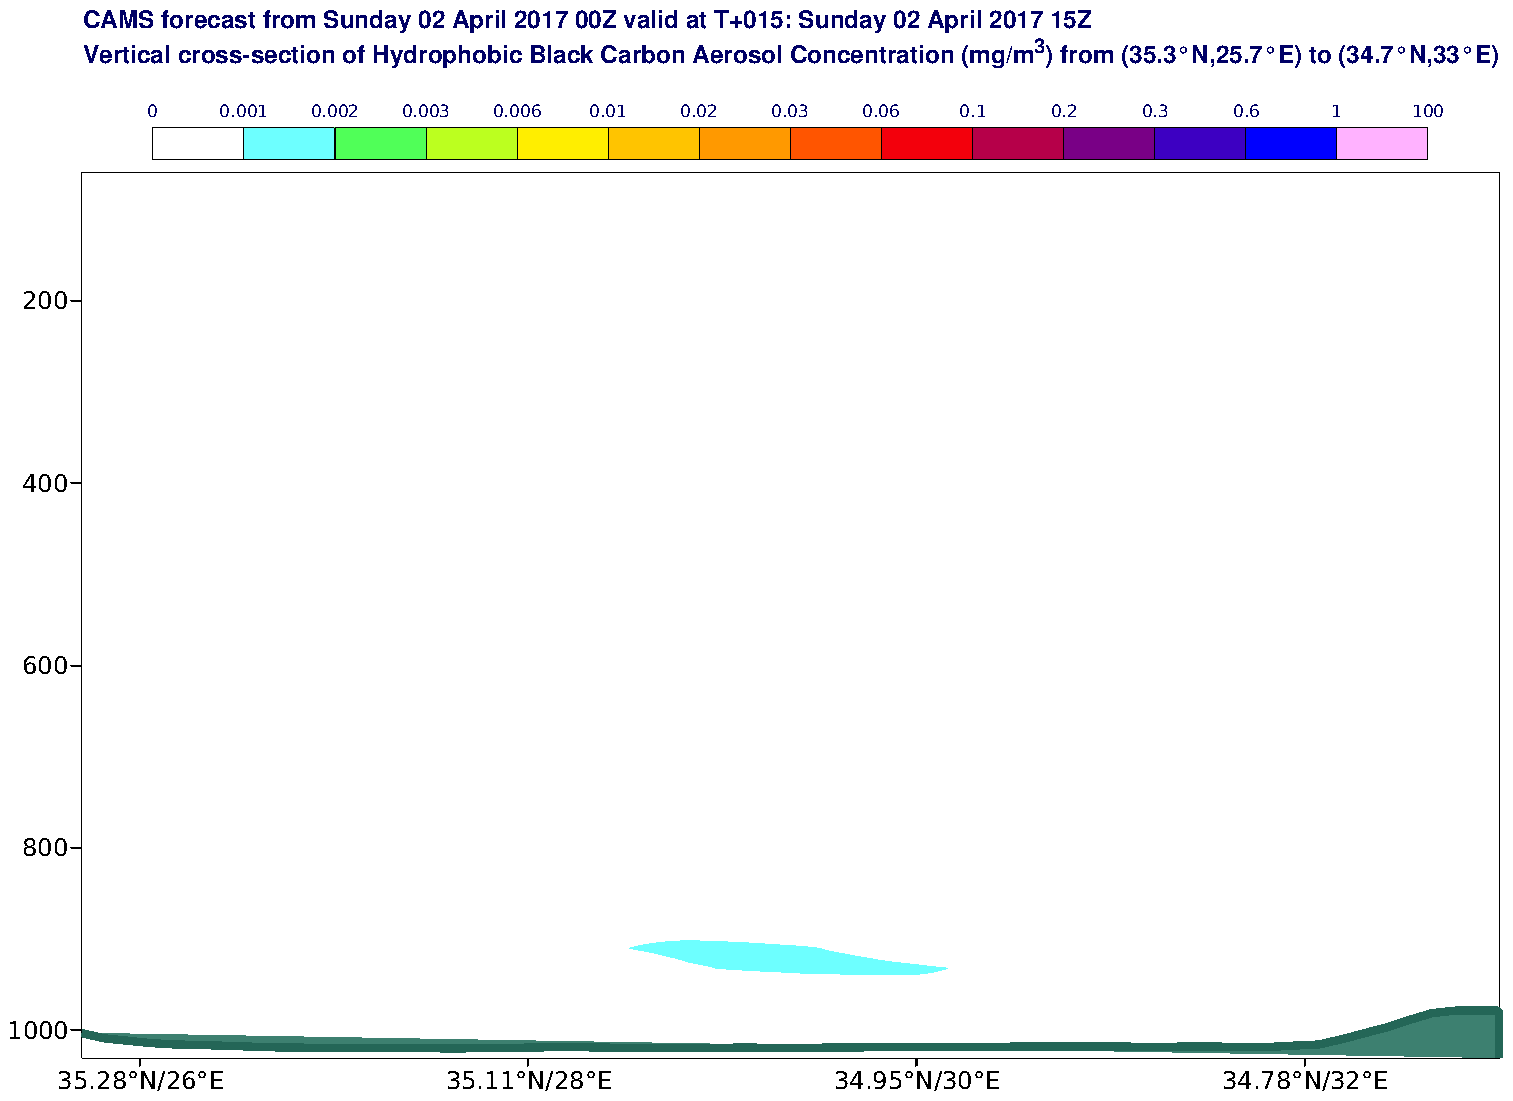 Vertical cross-section of Hydrophobic Black Carbon Aerosol Concentration (mg/m3) valid at T15 - 2017-04-02 15:00